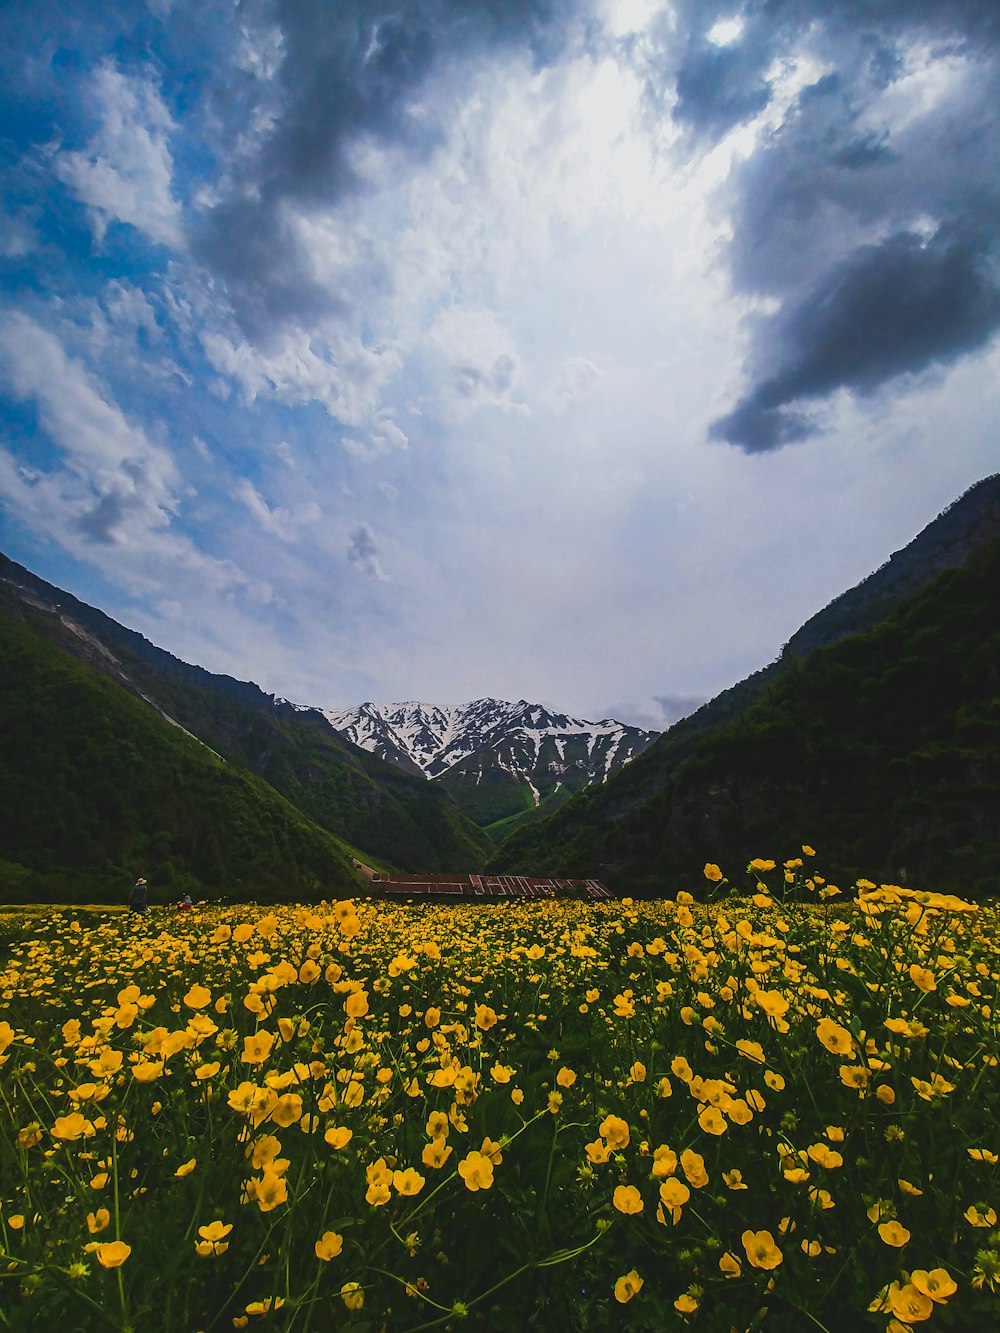 yellow flower field near green mountains under blue and white sunny cloudy sky during daytime